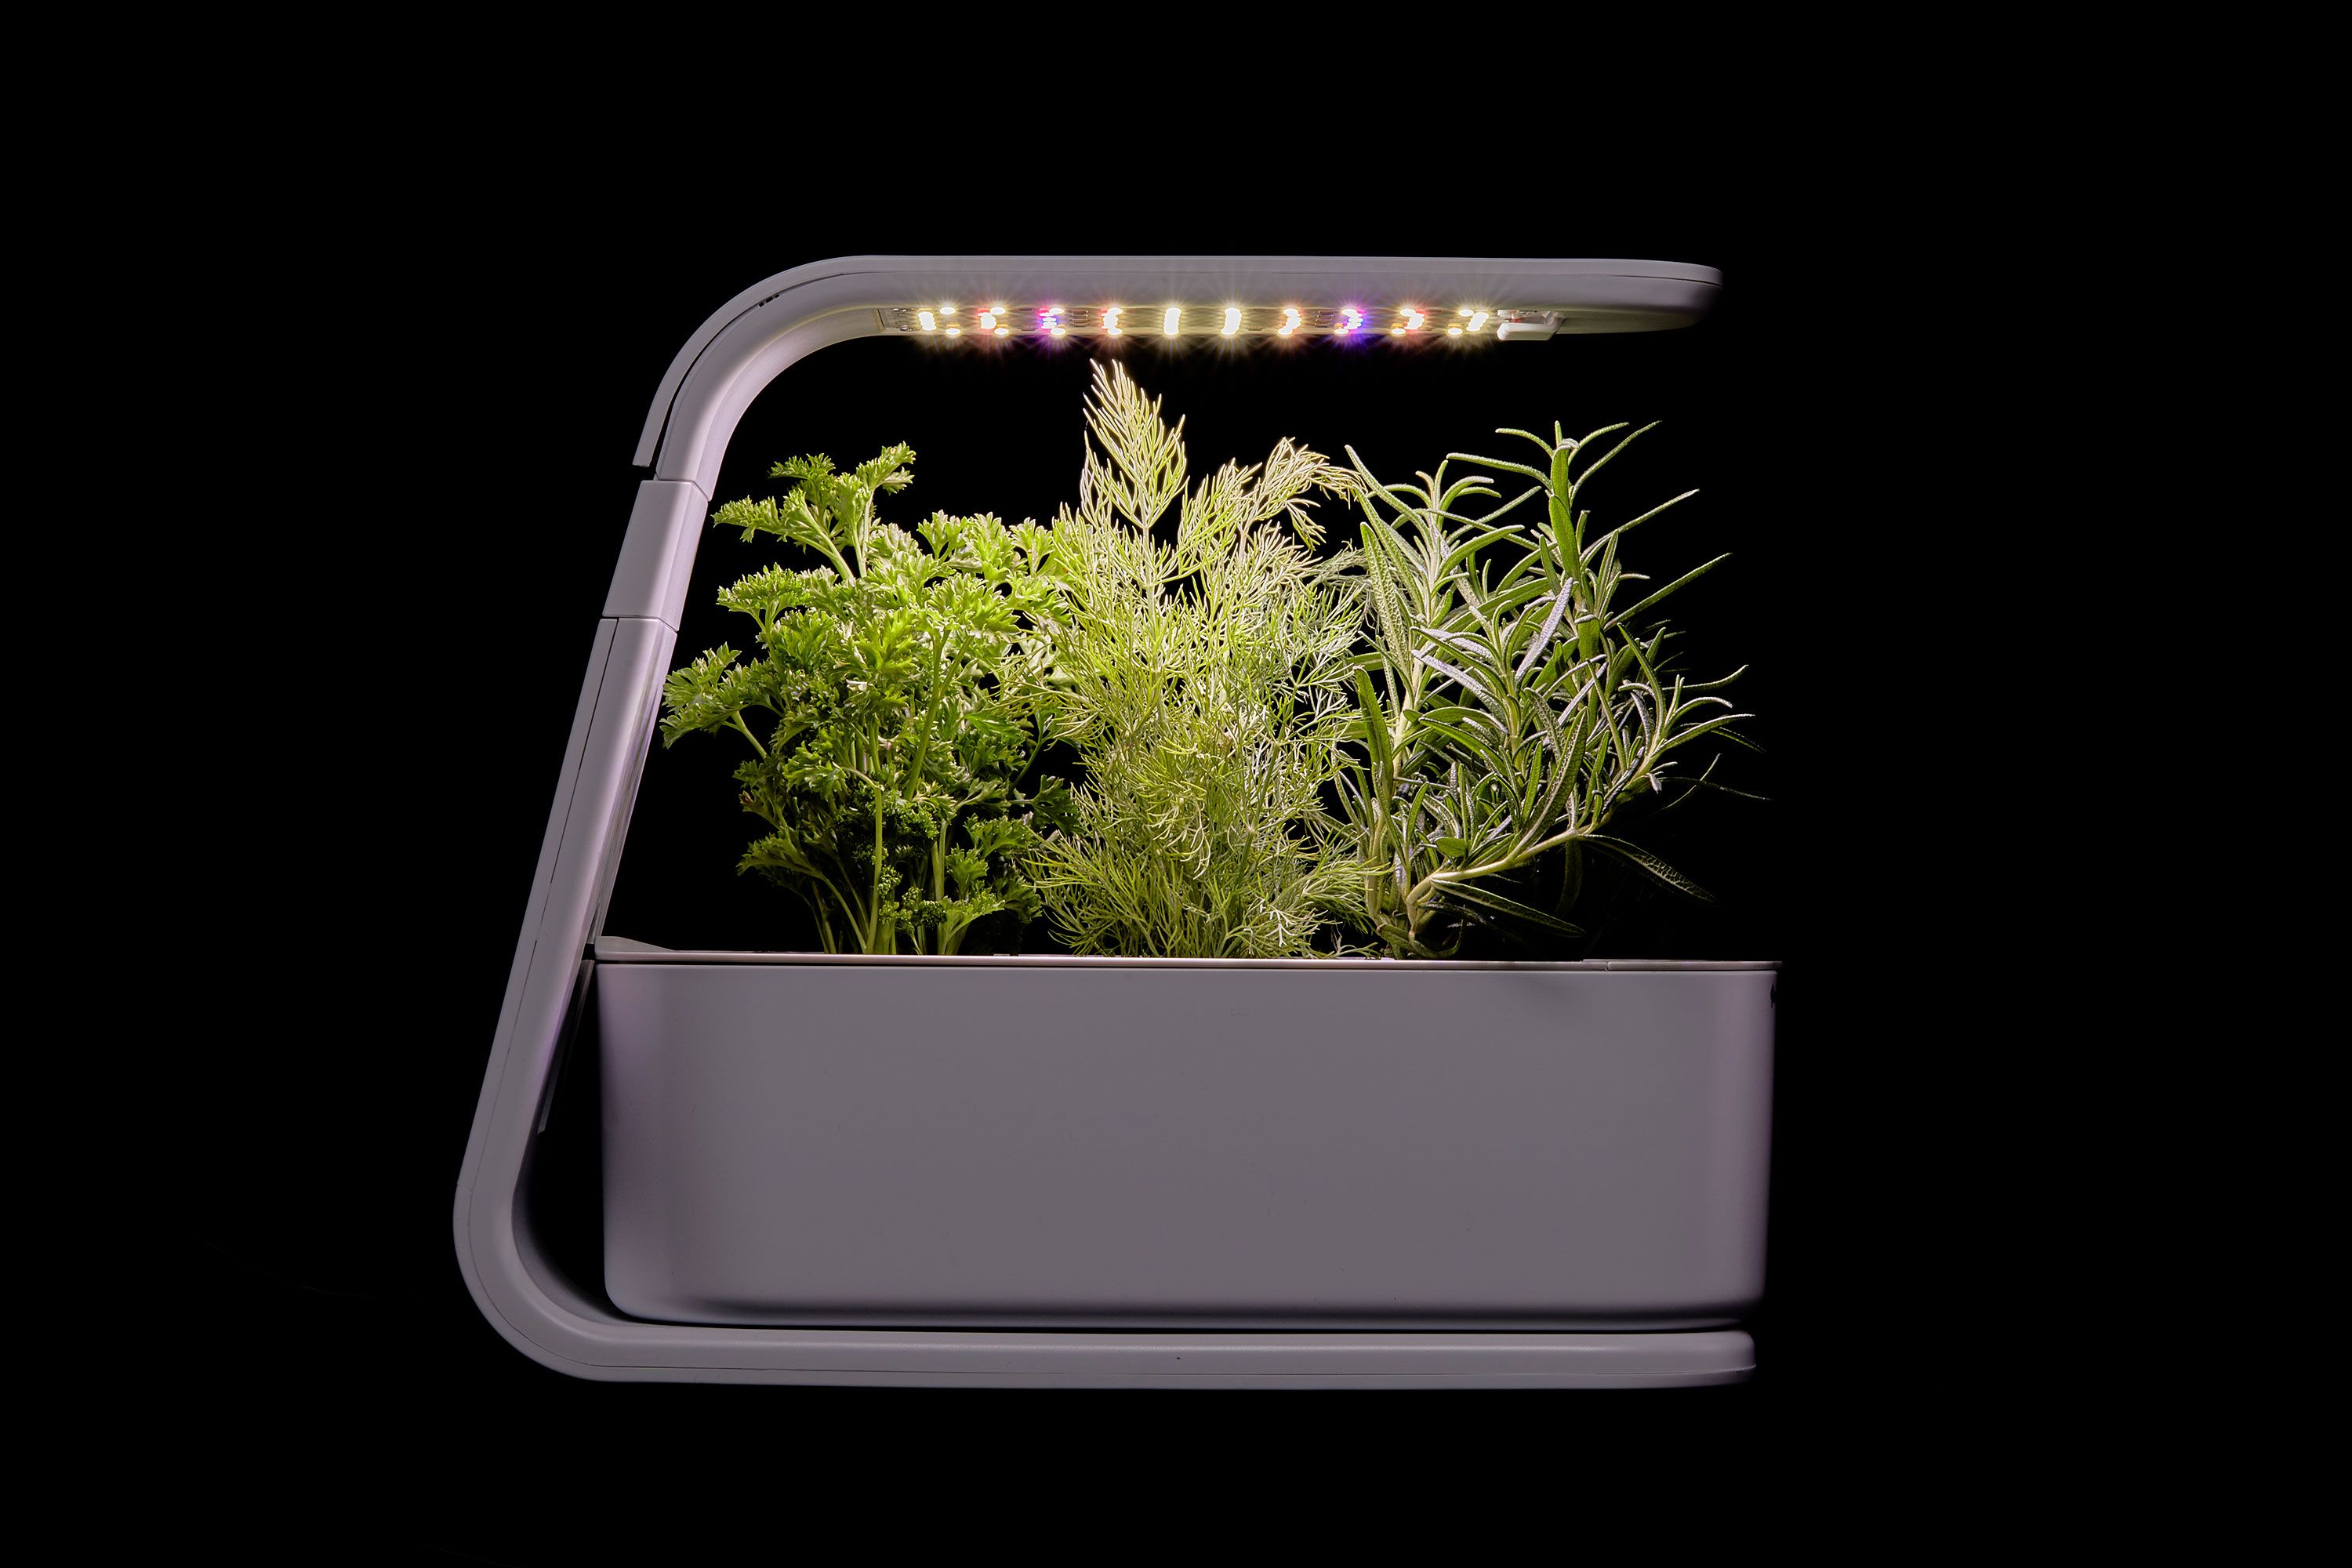 Top 15 smart garden for kitchen you need to invest in